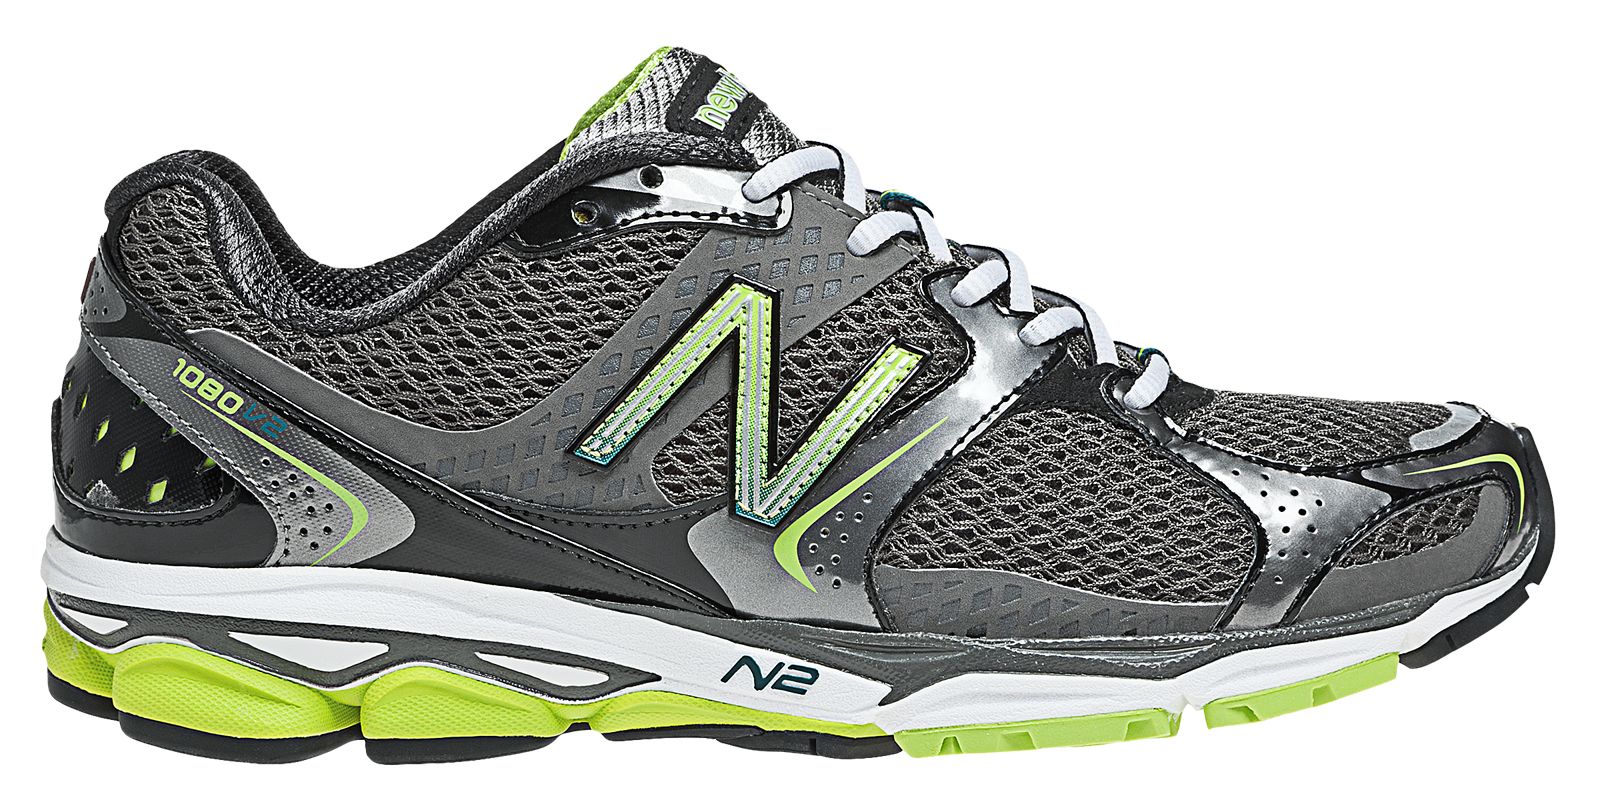 new balance running shoes outlet